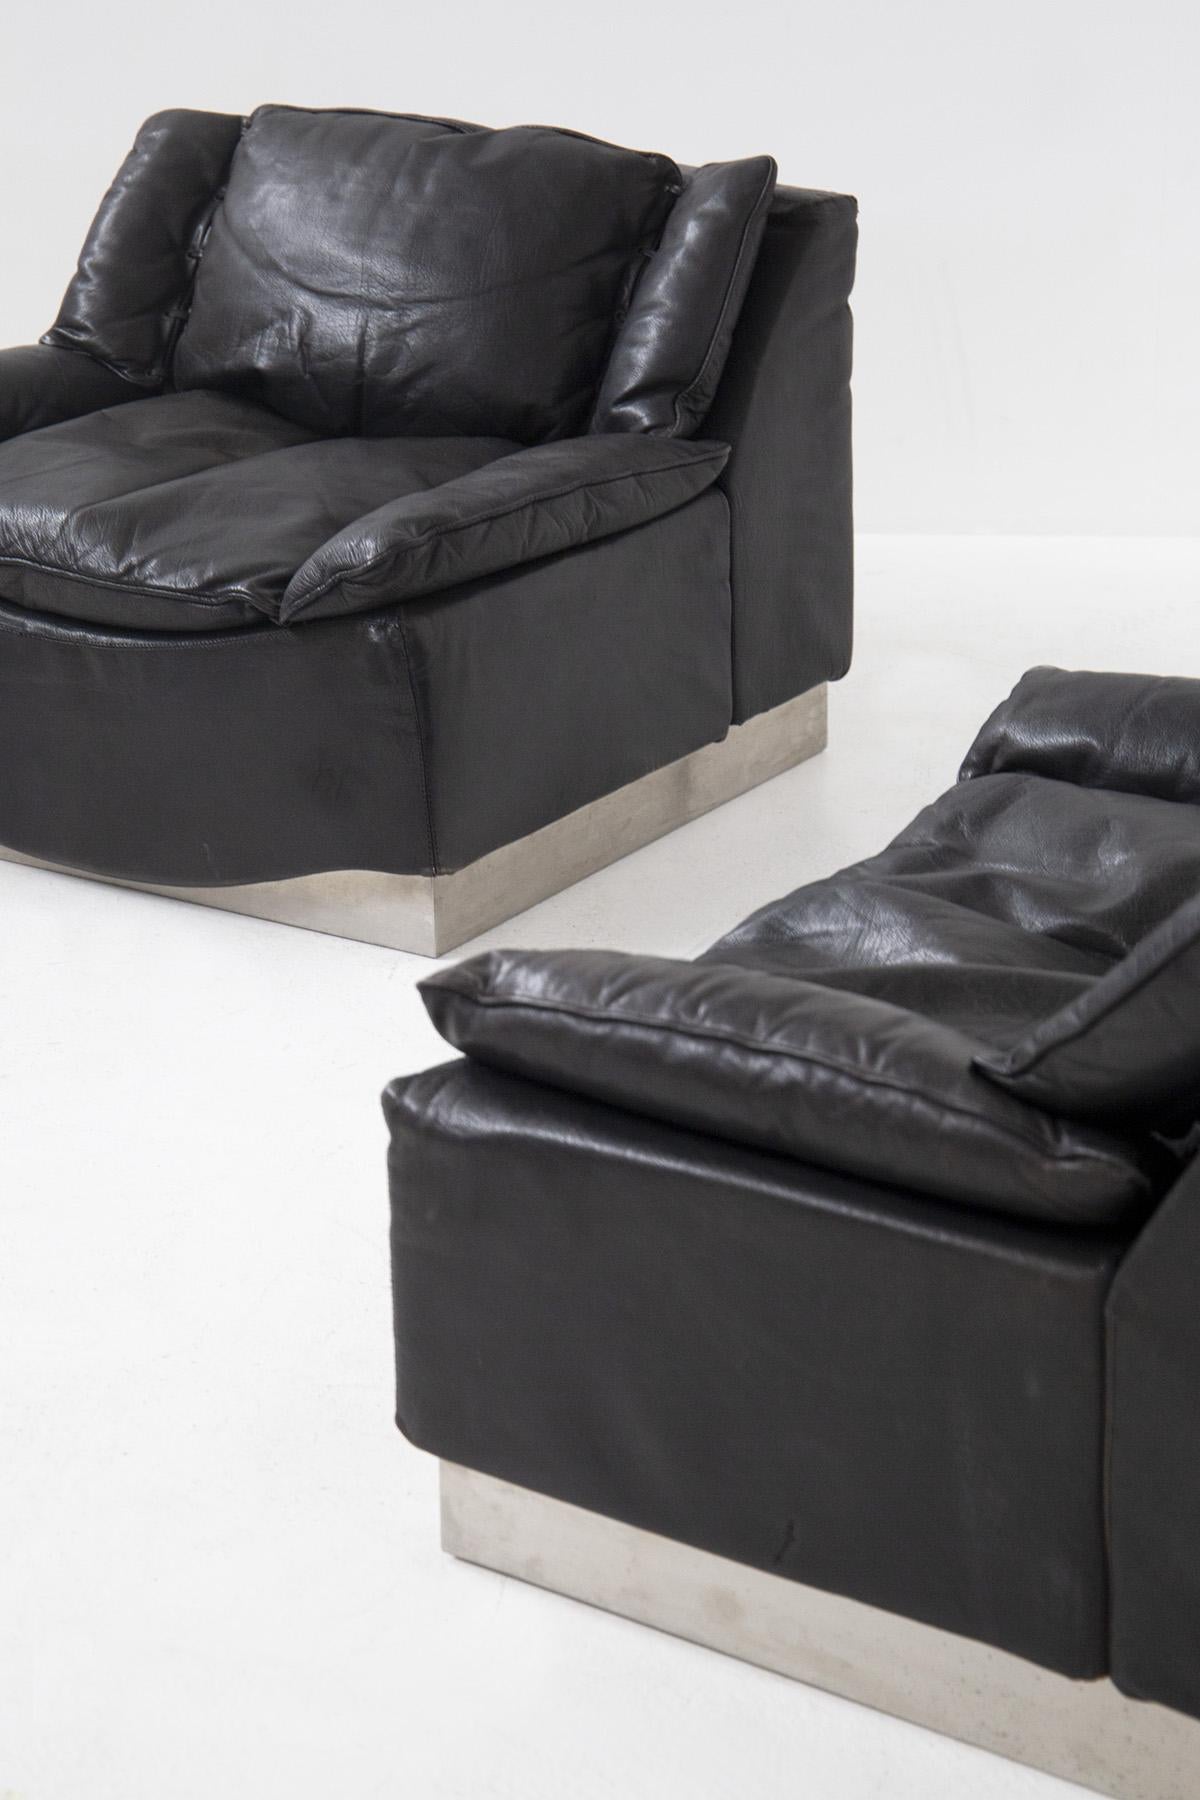 Luciano Frigerio Armchairs in Leather and Steel In Good Condition For Sale In Milano, IT